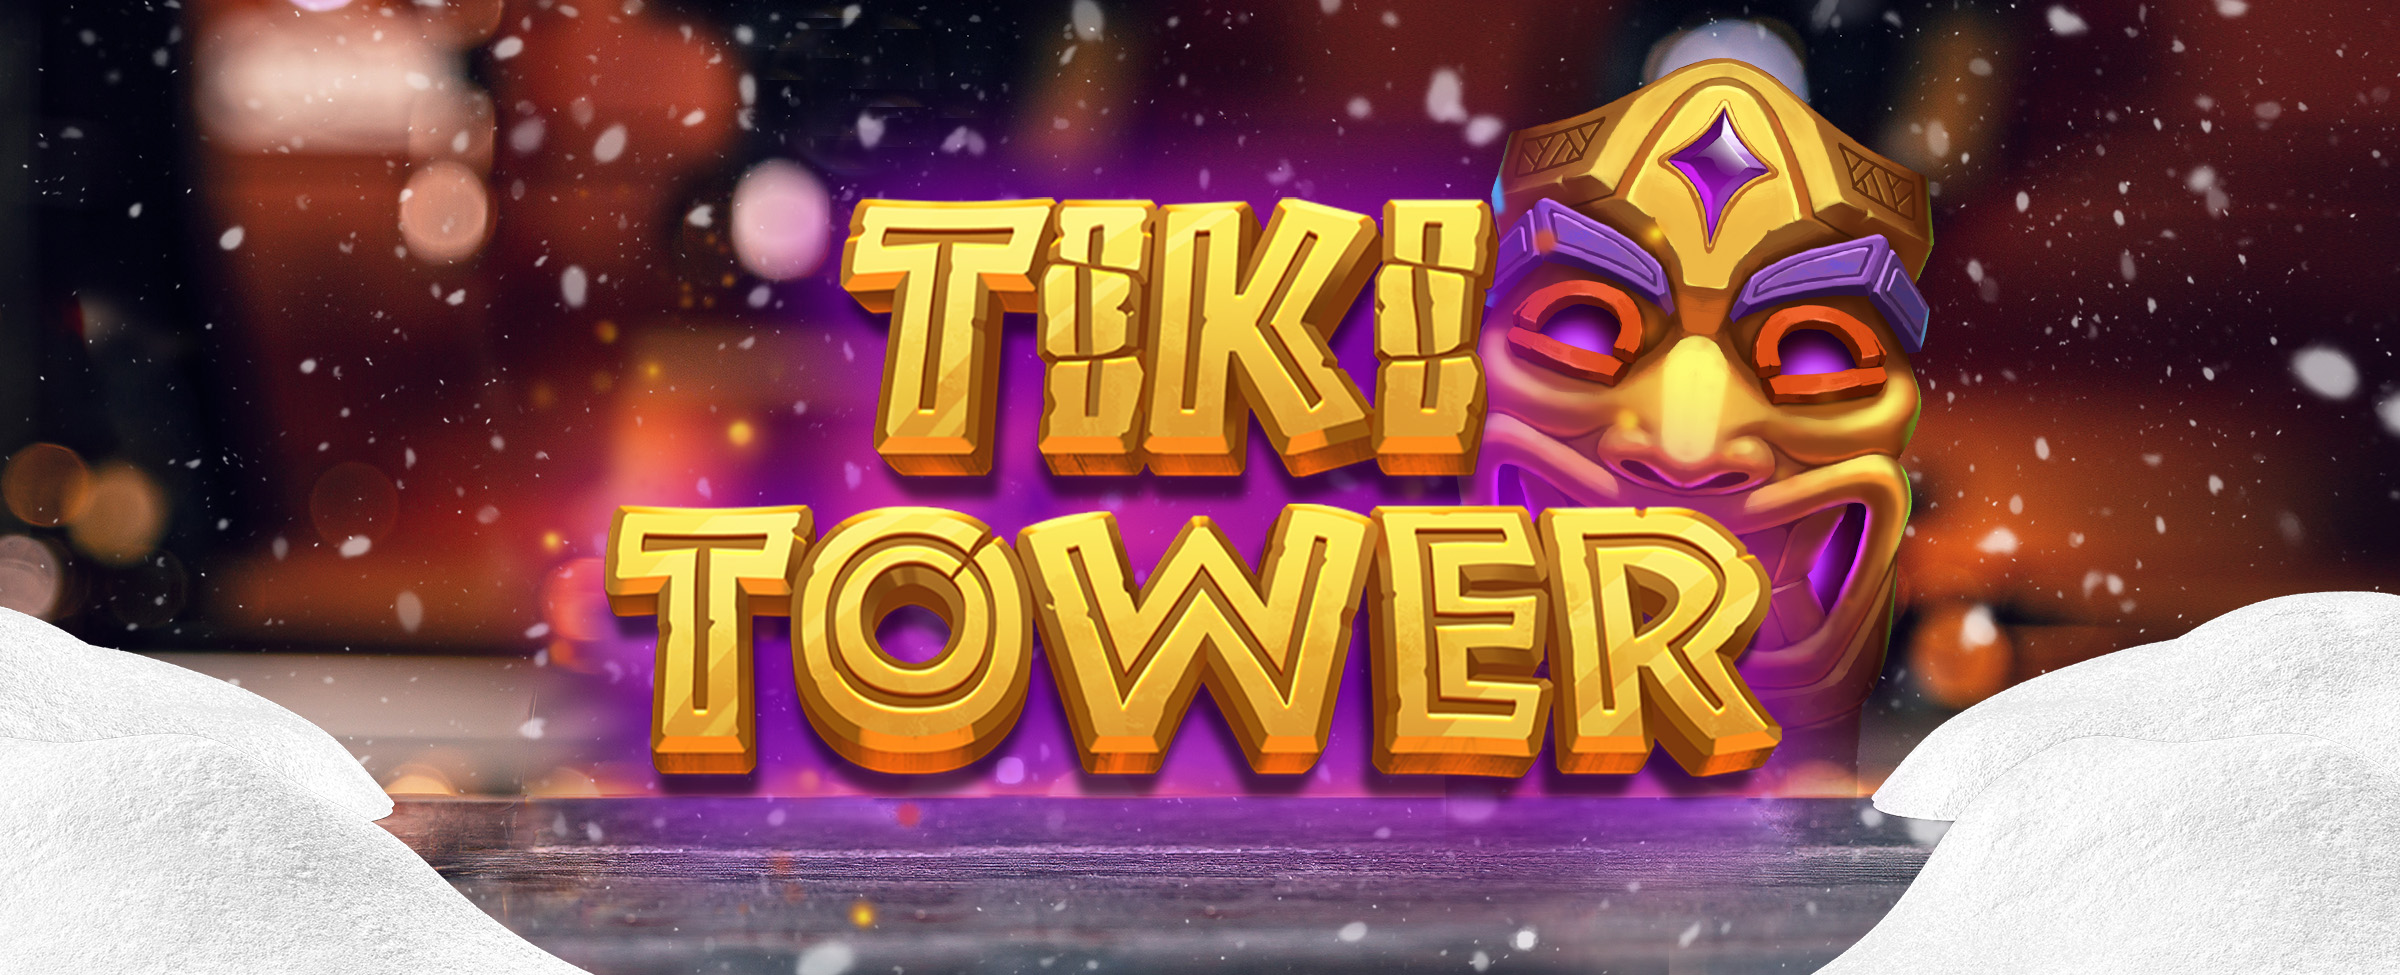 The Tiki Tower logo from the Cafe Casino slot game is featured in the middle, hovering above a dining table with snow mounding up either side, with snow falling all around and an out of focus diner in the distance.